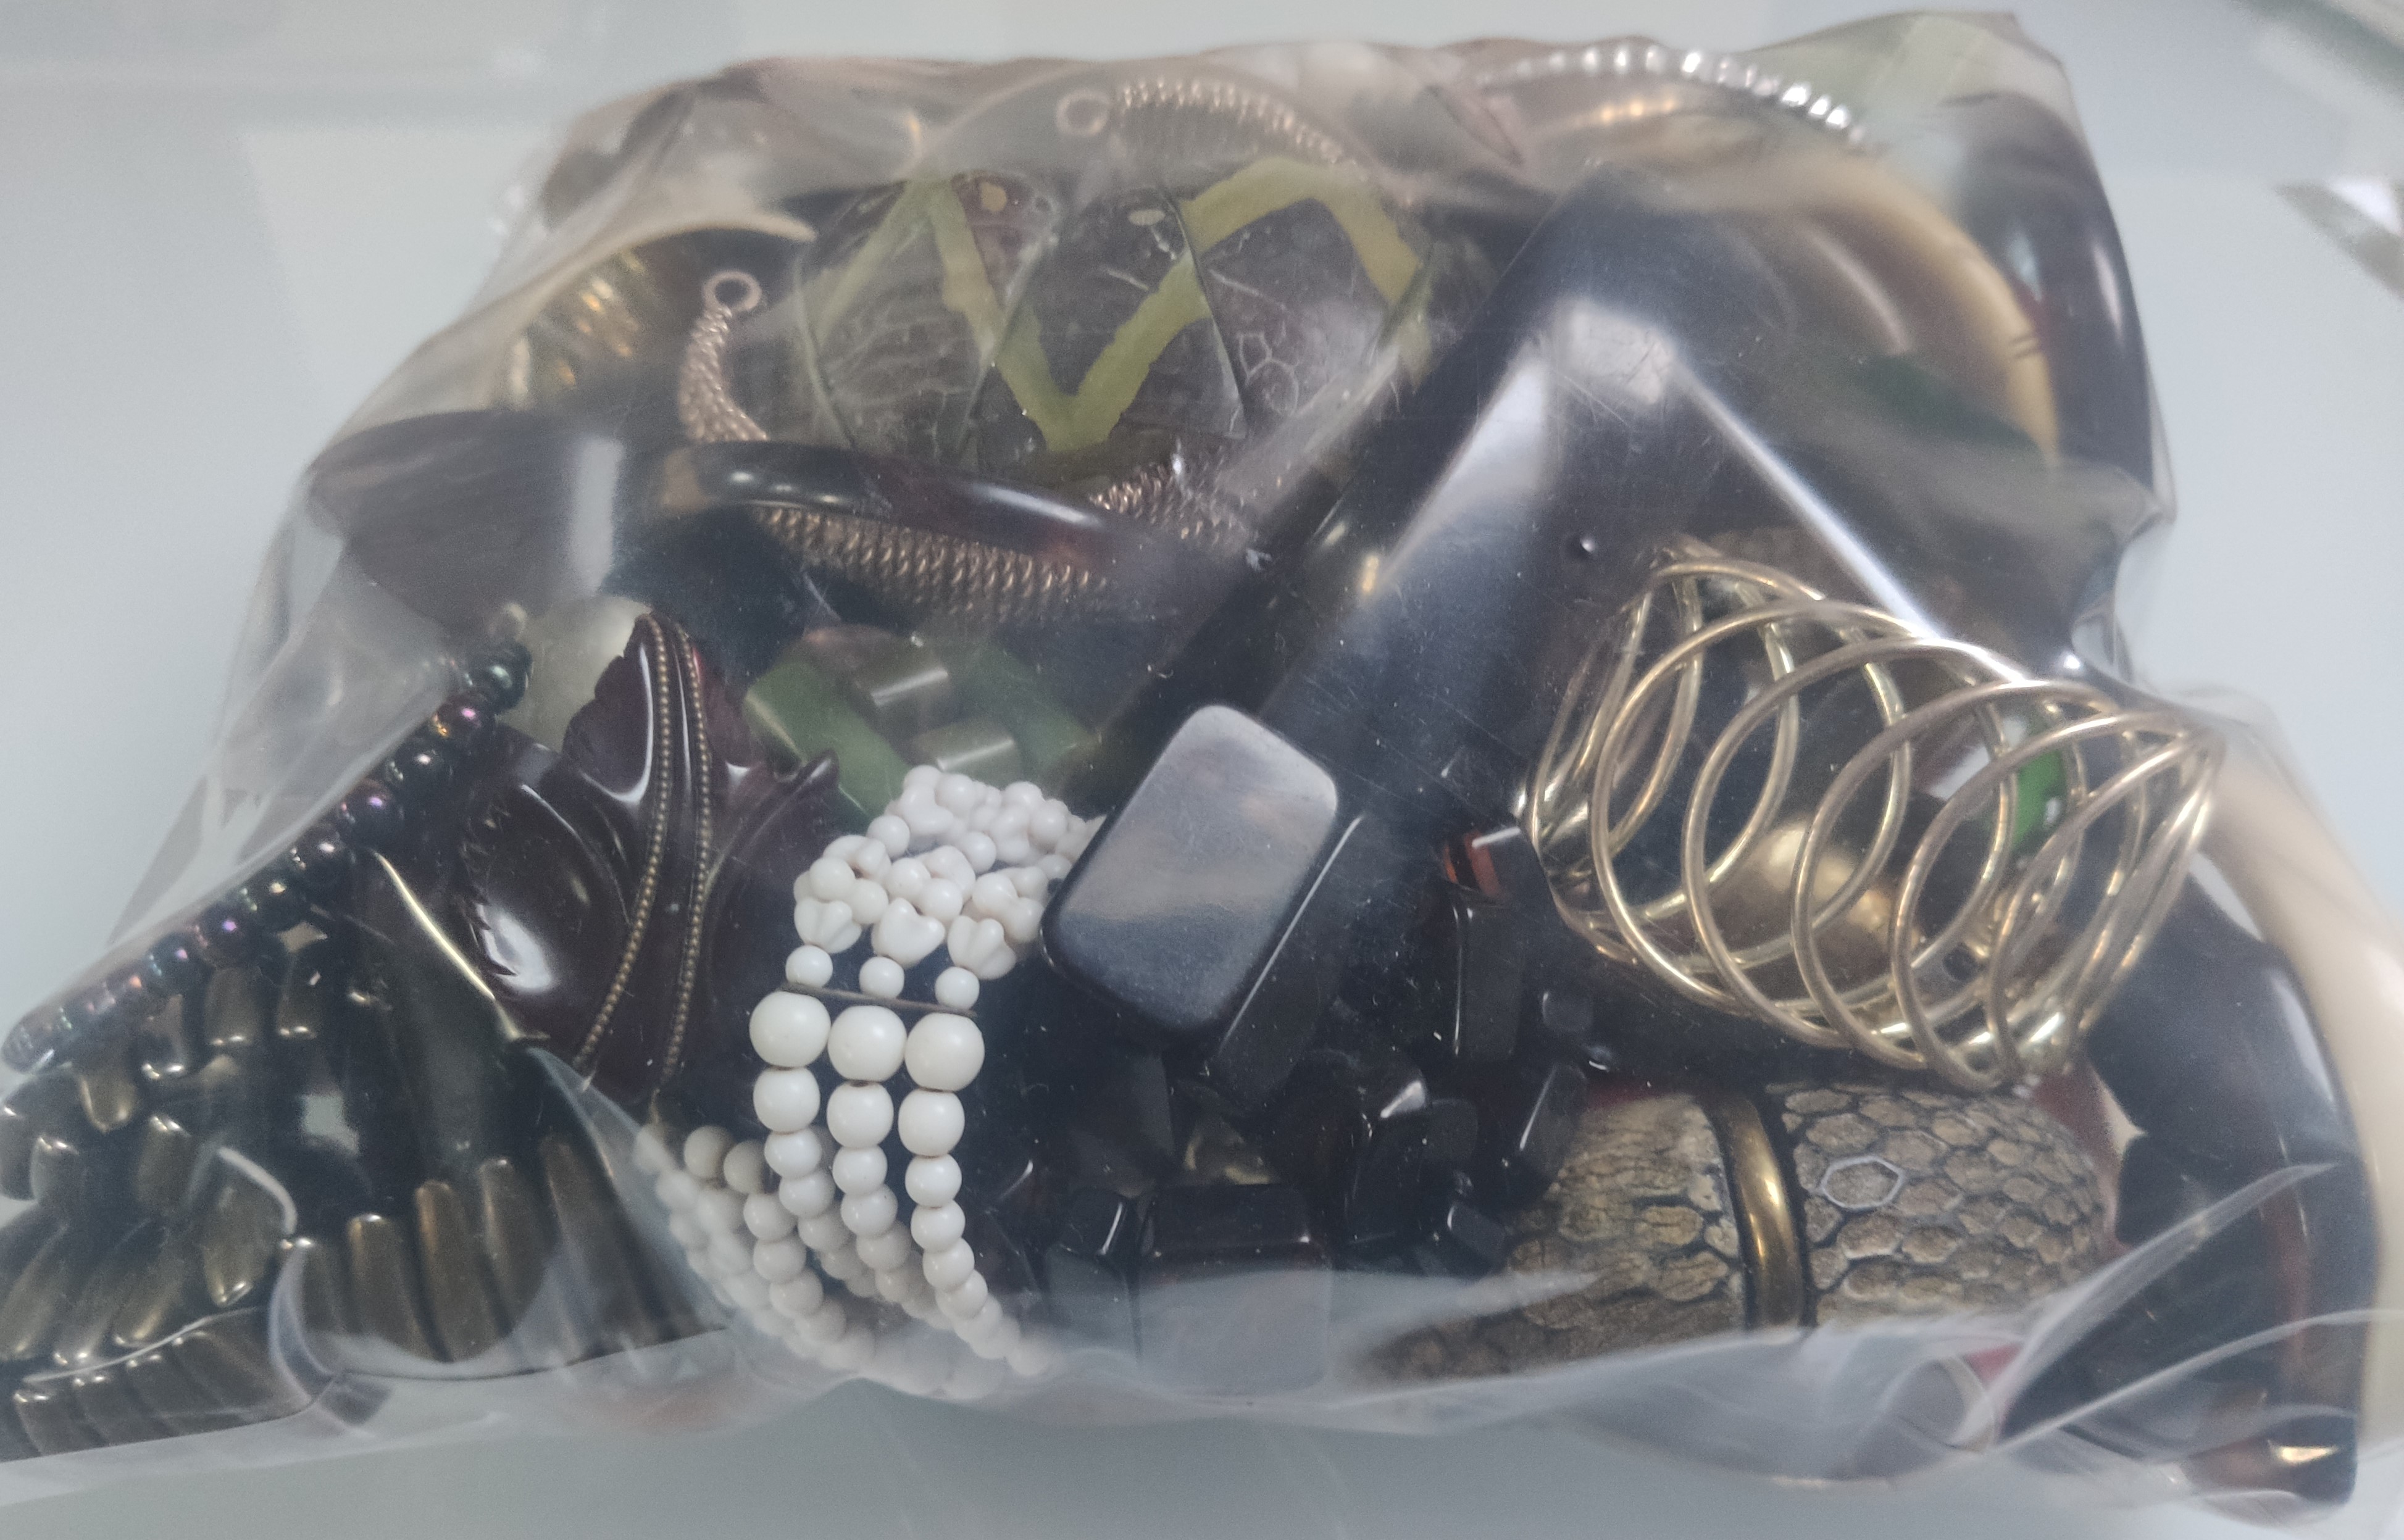 A Large Collection of Bracelets and Bangles In A Bag. Approximately 2KG. - Image 2 of 3